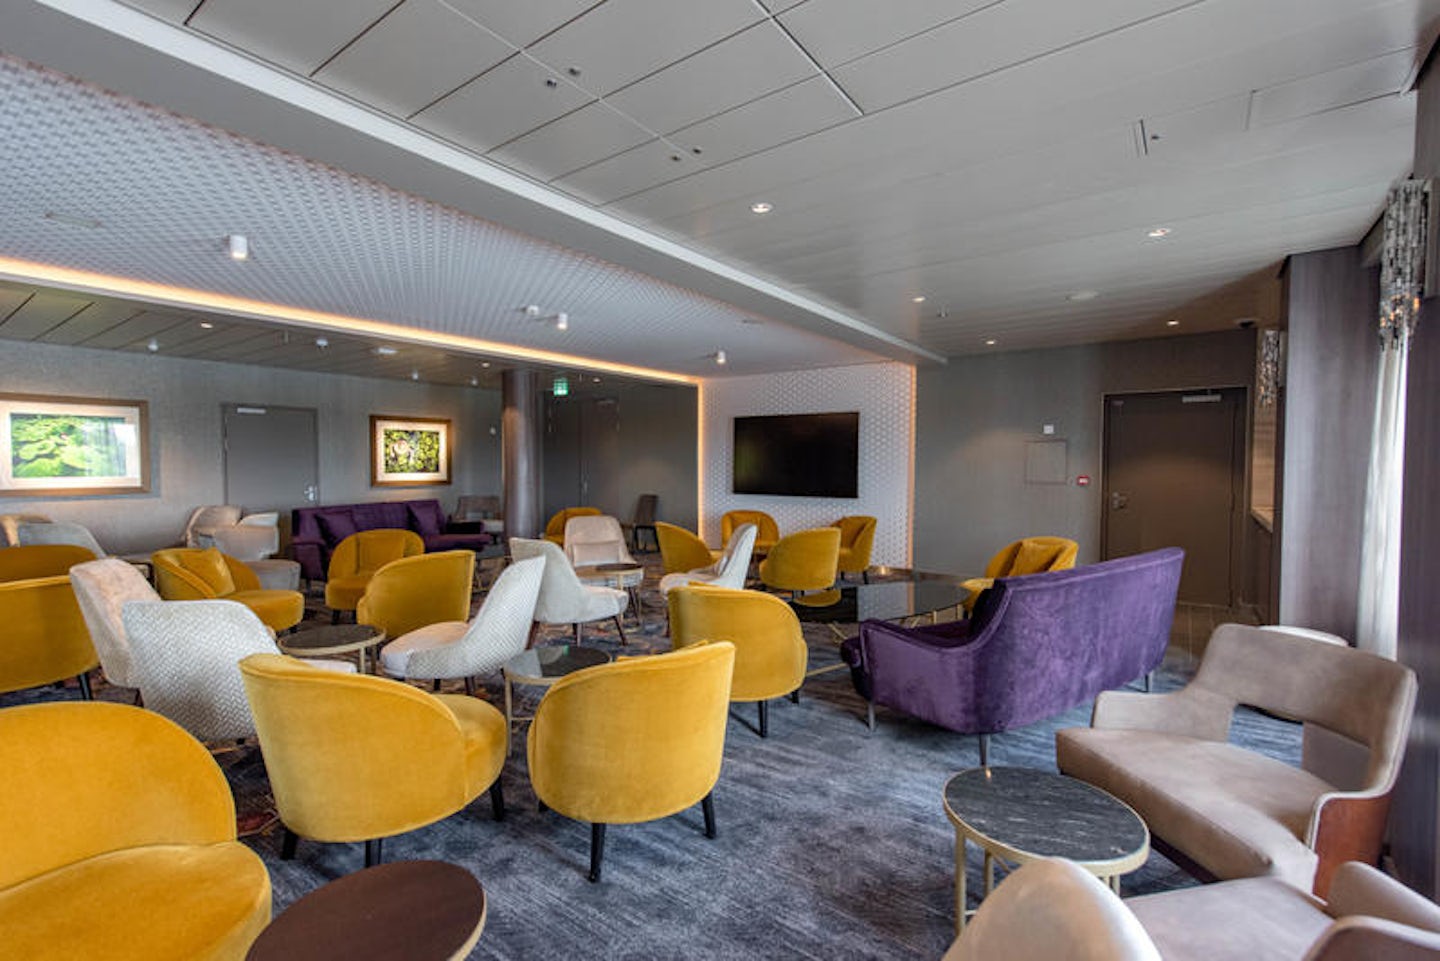 The Meeting Place on Celebrity Edge